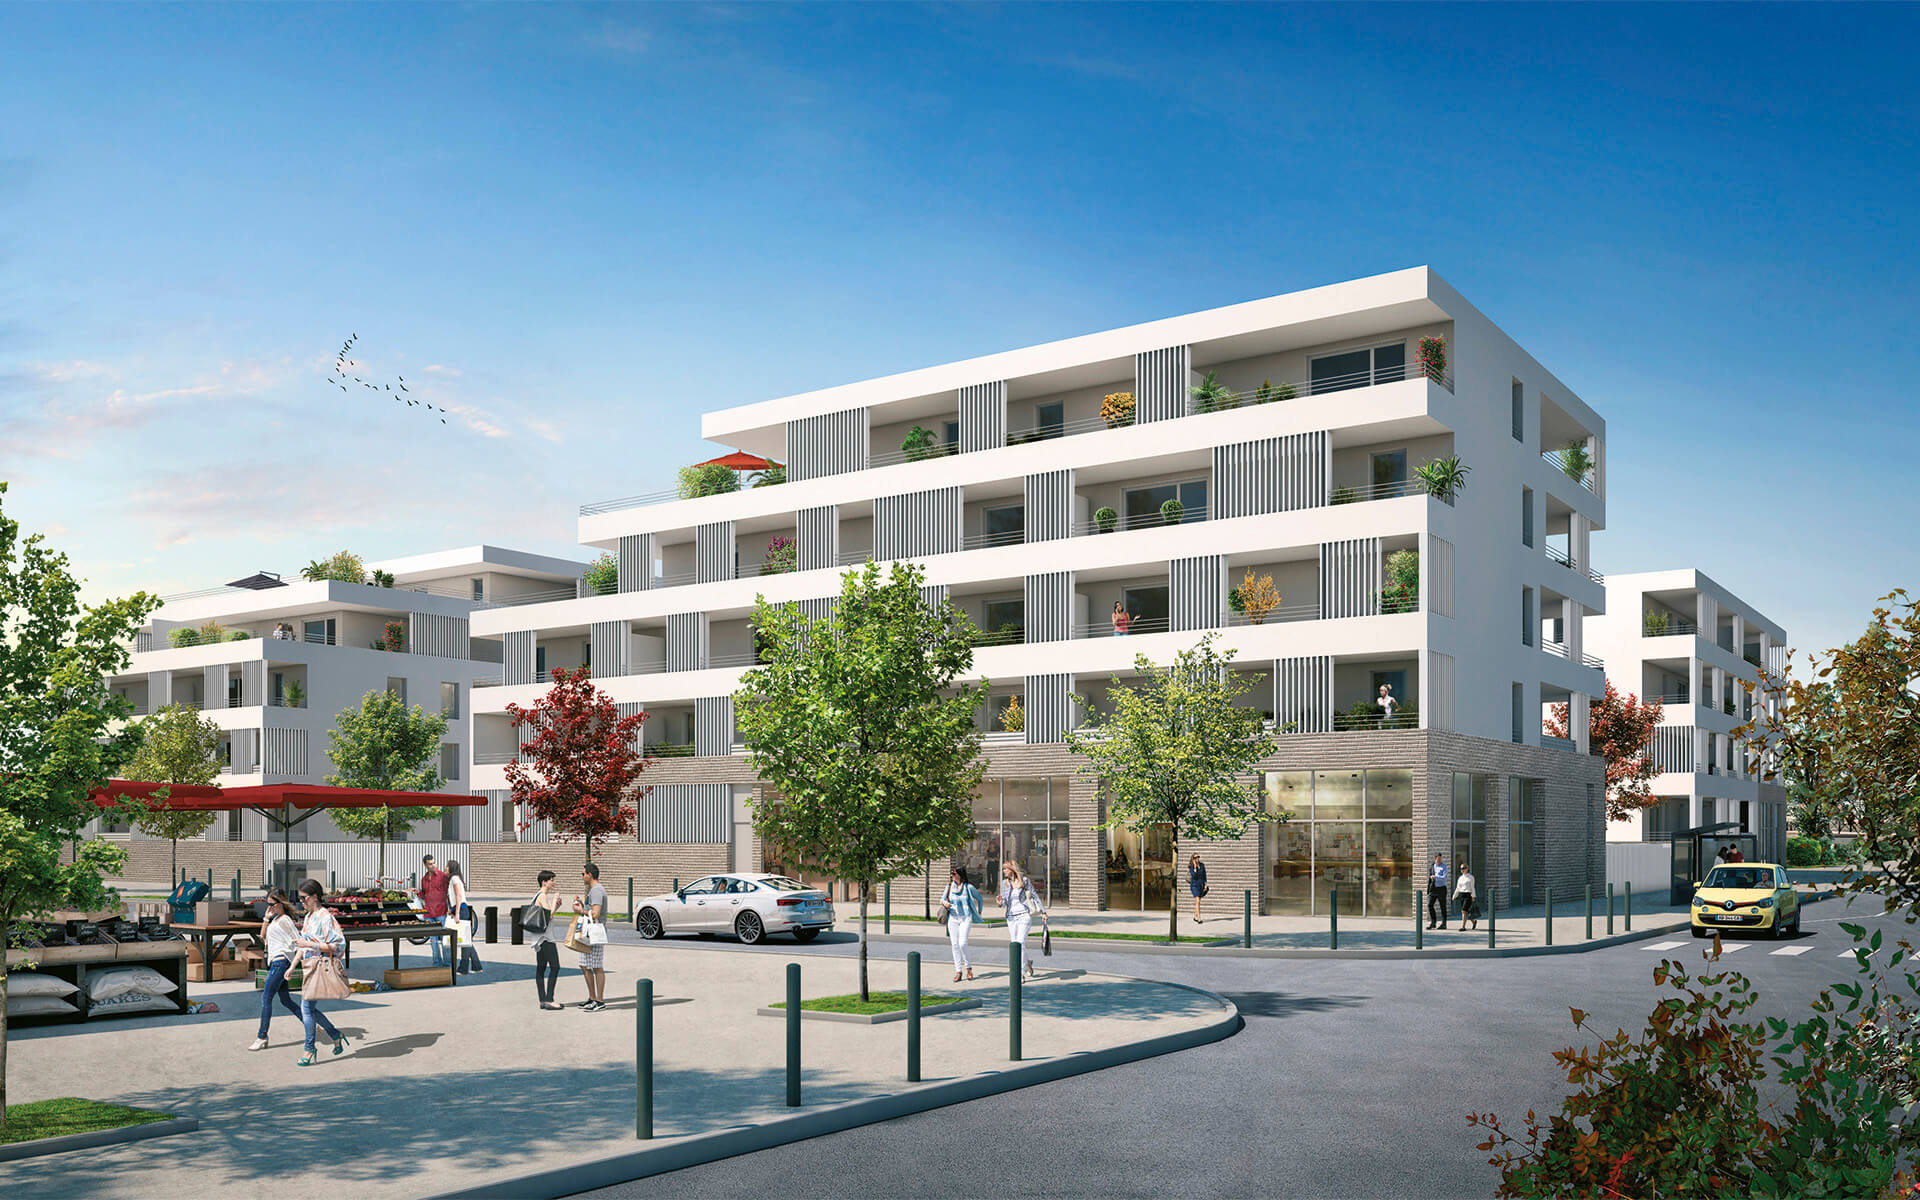 residence les maraichers – toulouse- metro- place micoulaud- terrasse- logements neuf- investissement